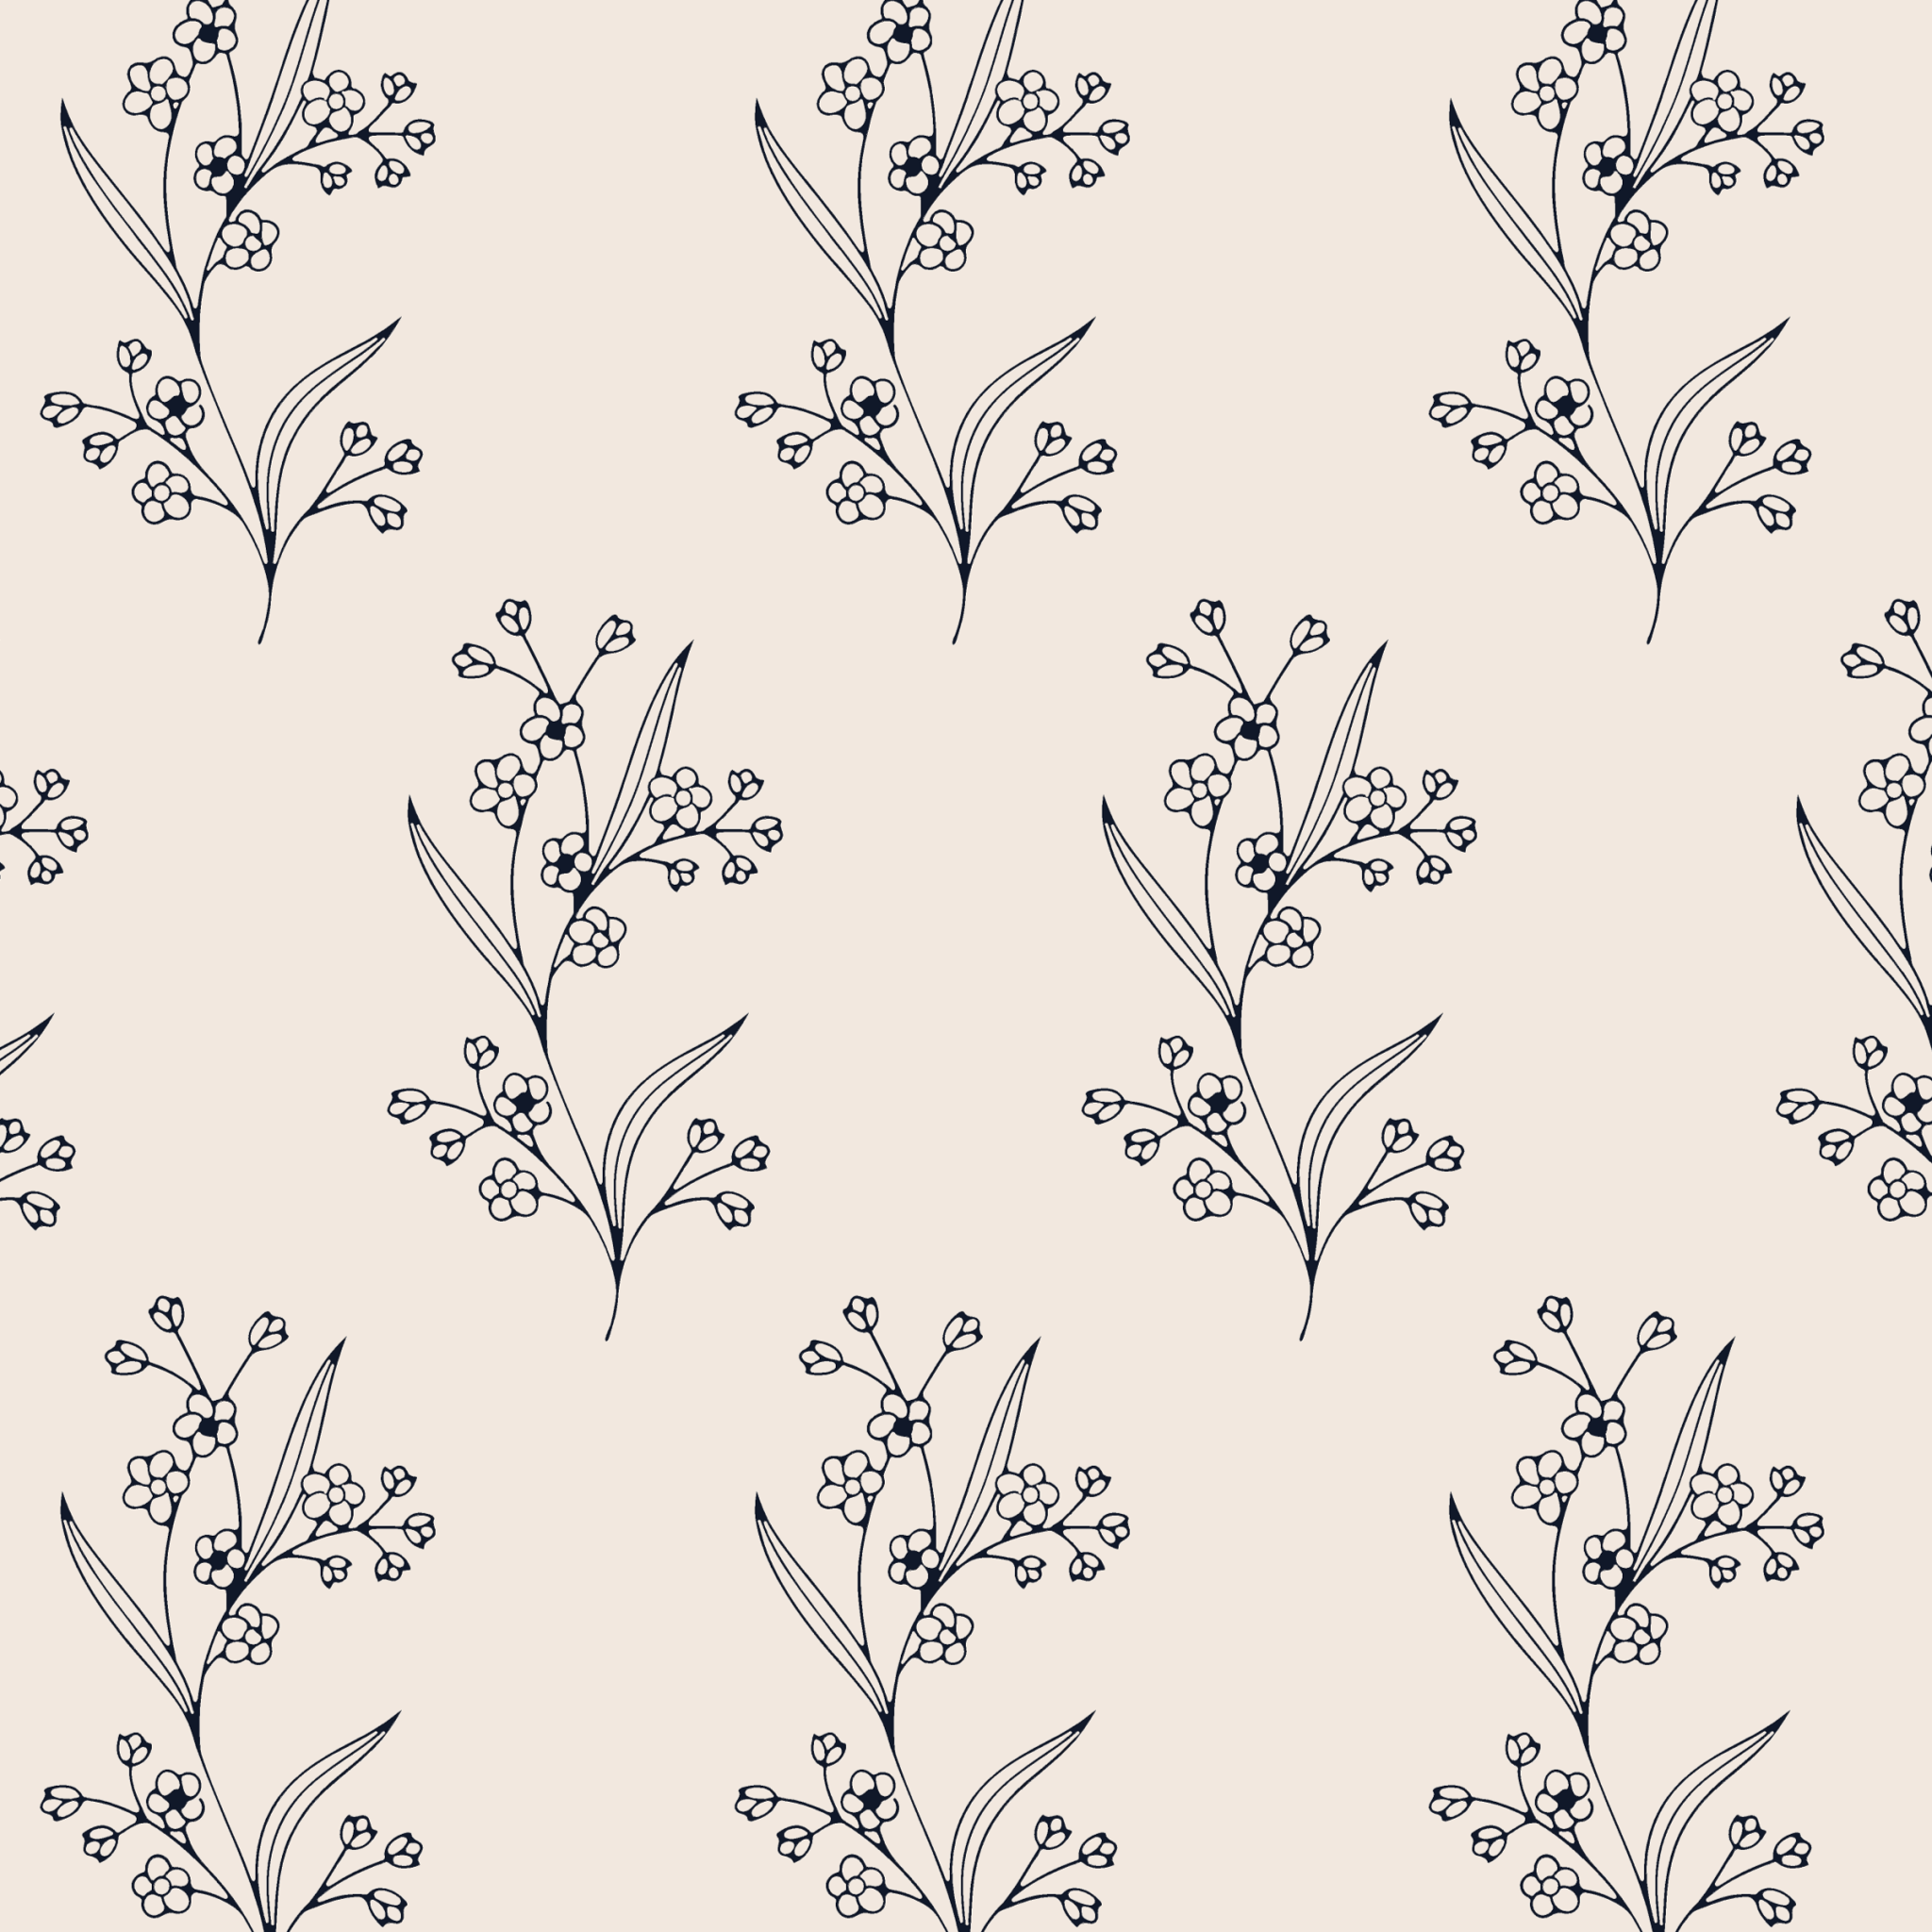 Sample of neutral colored sketched twig peel and stick customizable wallpaper.